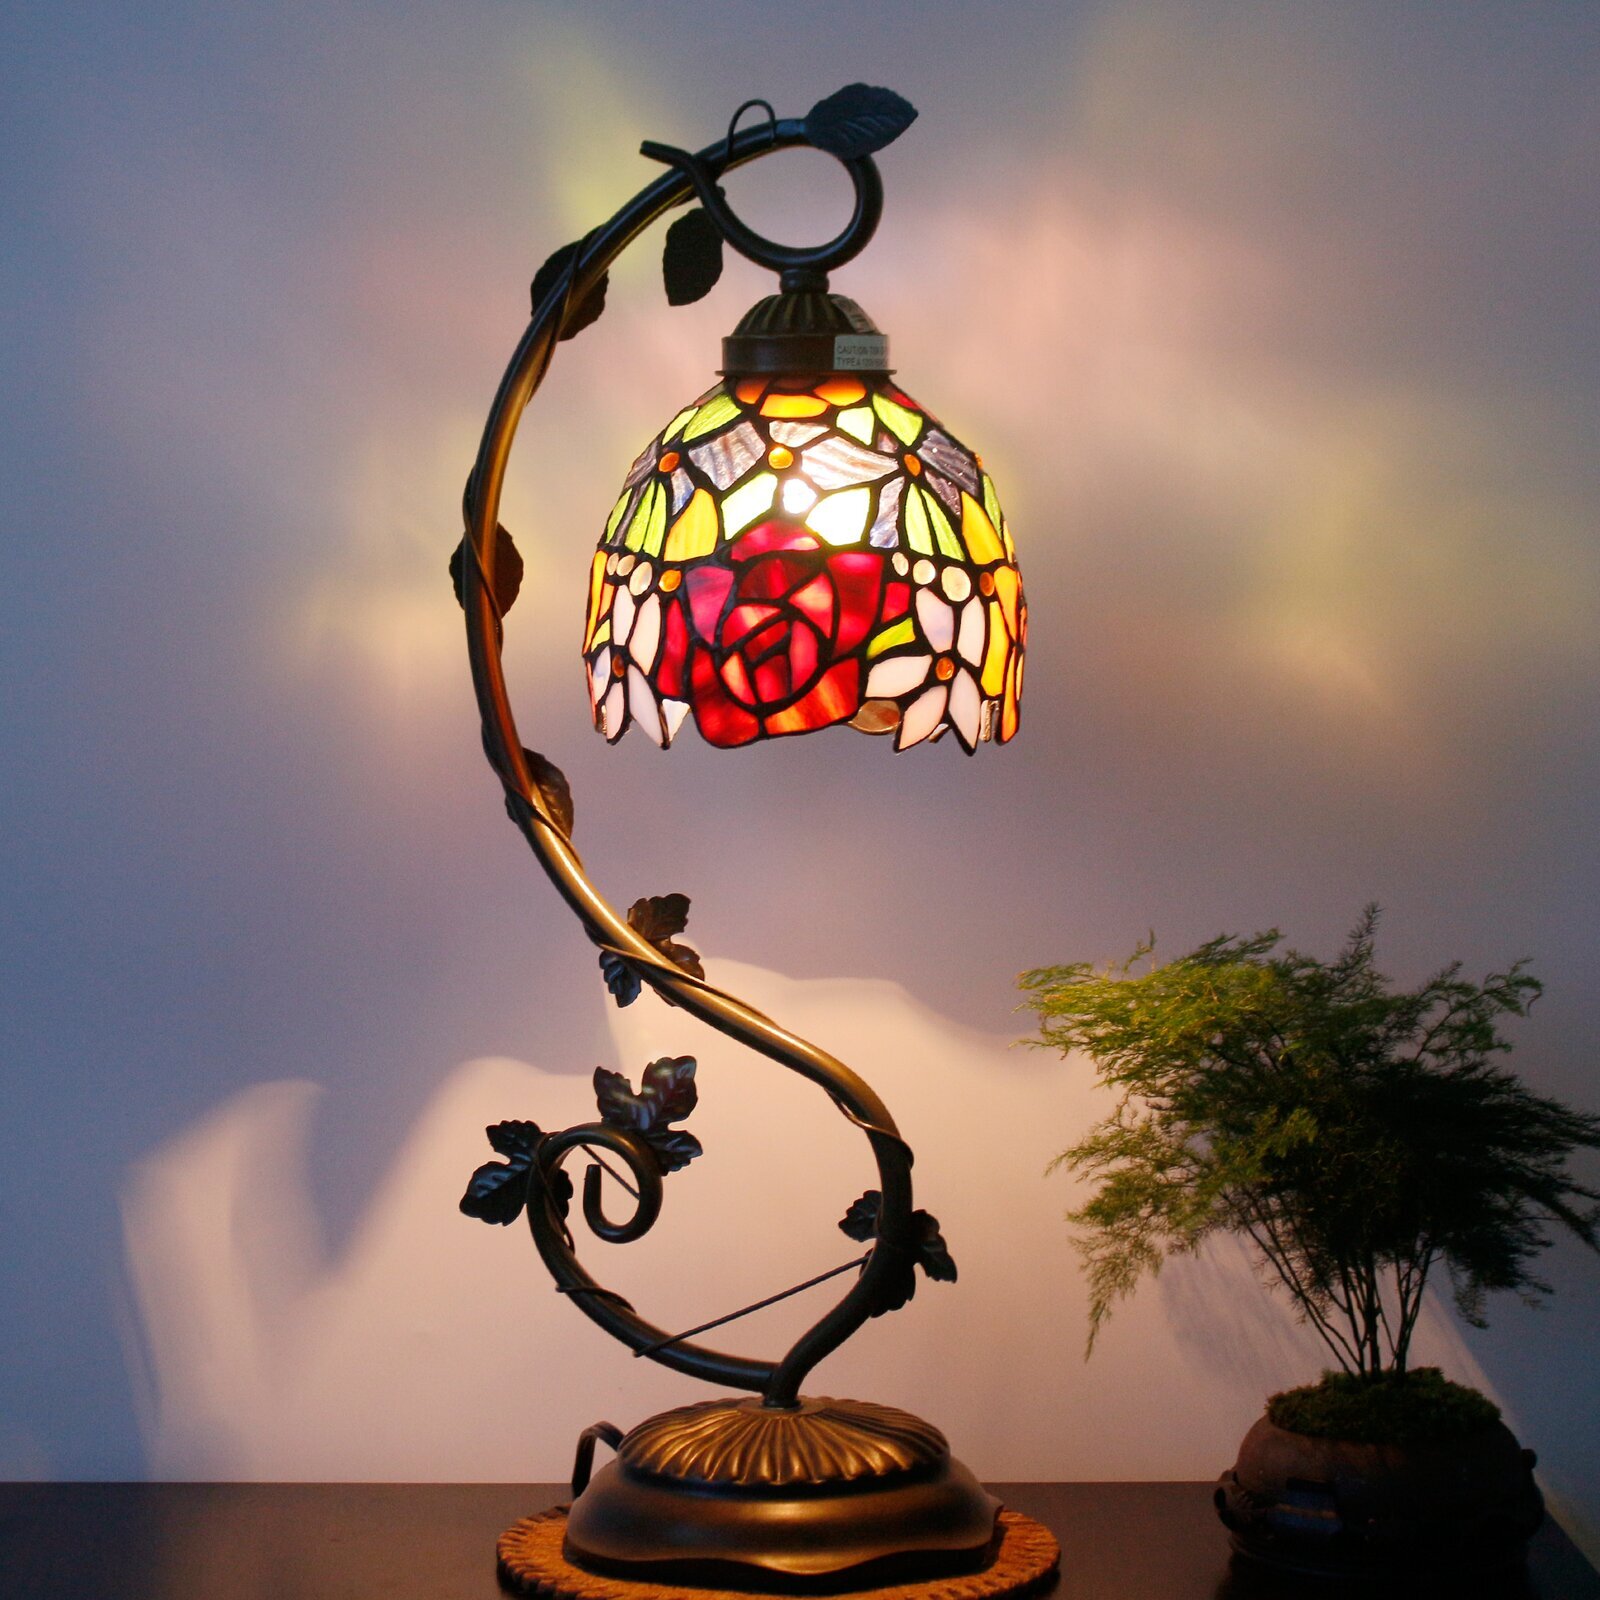 Bedside Table Lamp - World Menagerie Tiffany Style Stained Glass Lamp, Red Rose Nightstand Reading Desk Light W6H22 Inch S001, Lover Girlfriend Women Kid's Living Room Bedroom Office Coffee Bar Craft Gift